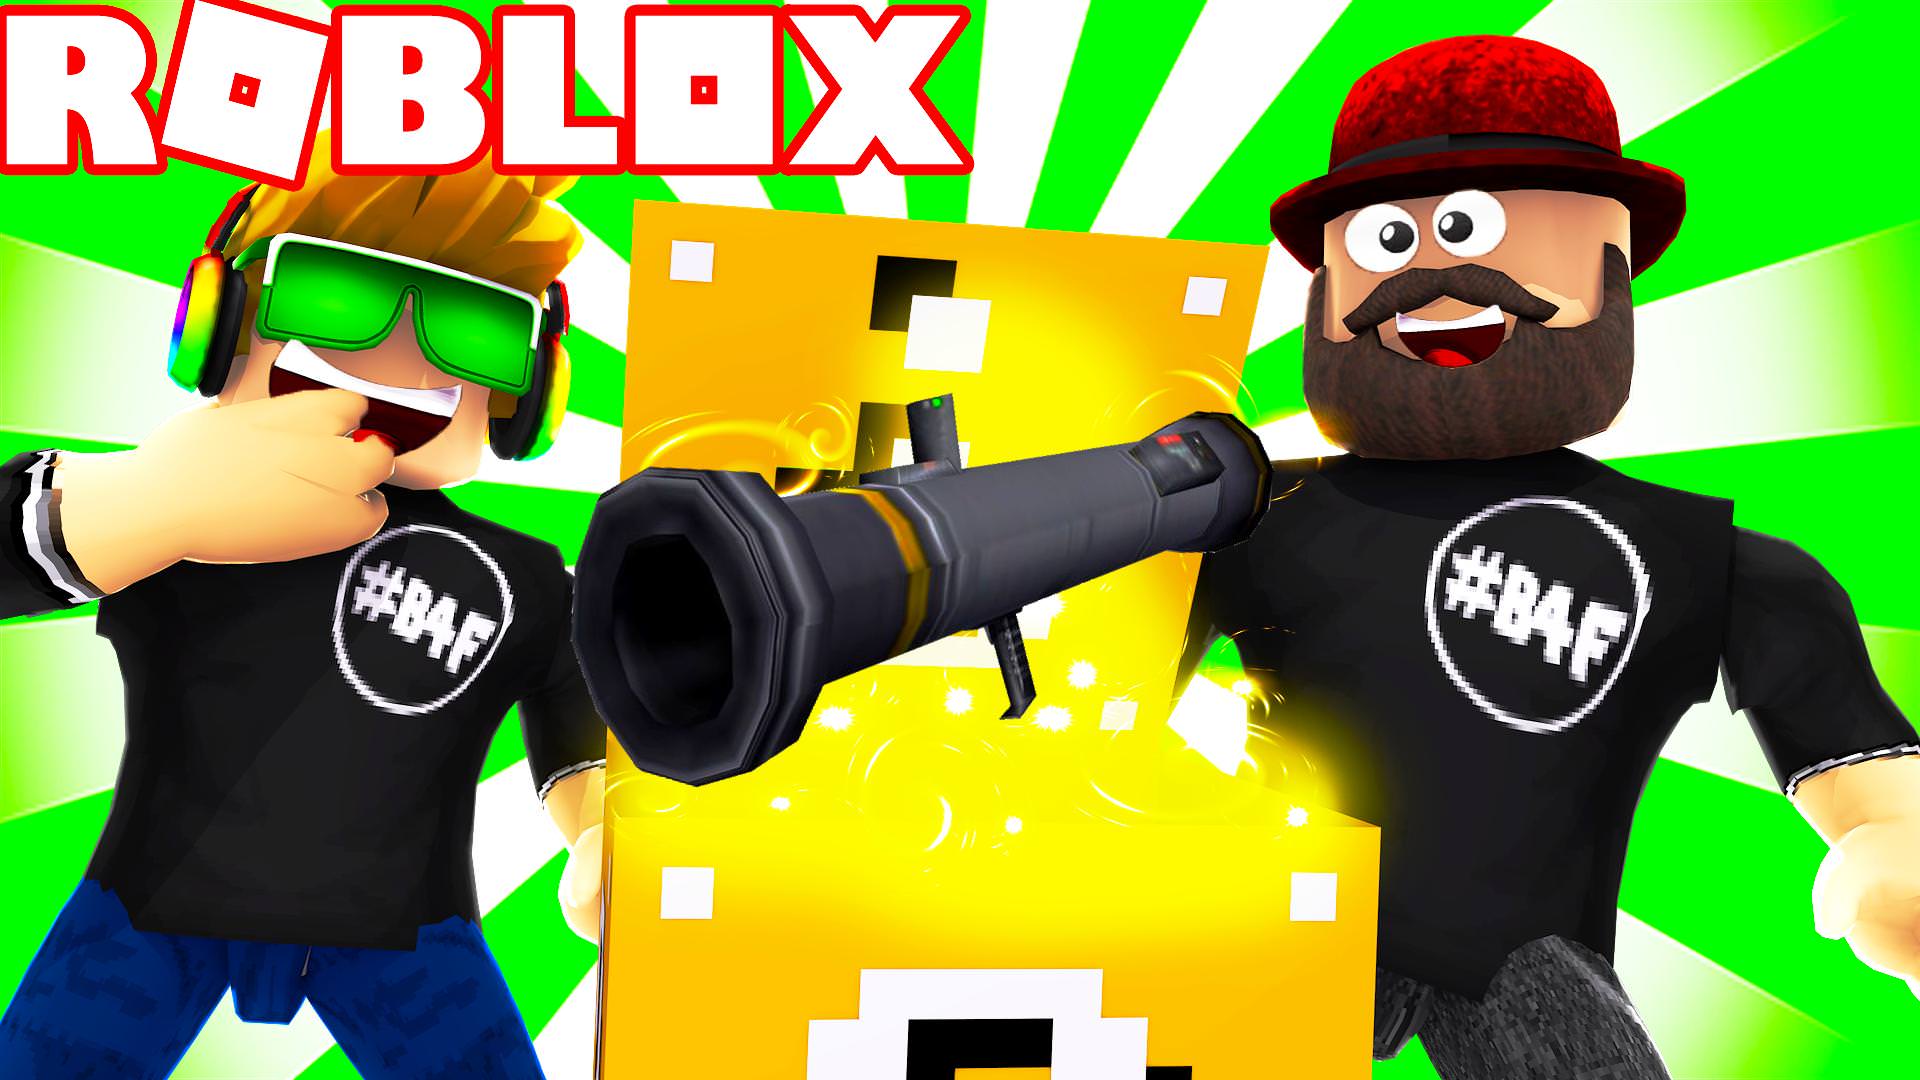 Blox4fun On Twitter Bazooka Is Op Roblox Lucky Blocks Https T Co Td5w1qxzdx Shoutgamers Gamersunite Gamerretweeters Gamerrter Youtubegaming Youtube Https T Co J5recrt8q2 - blox4fun on twitter i am super fast in roblox parkour